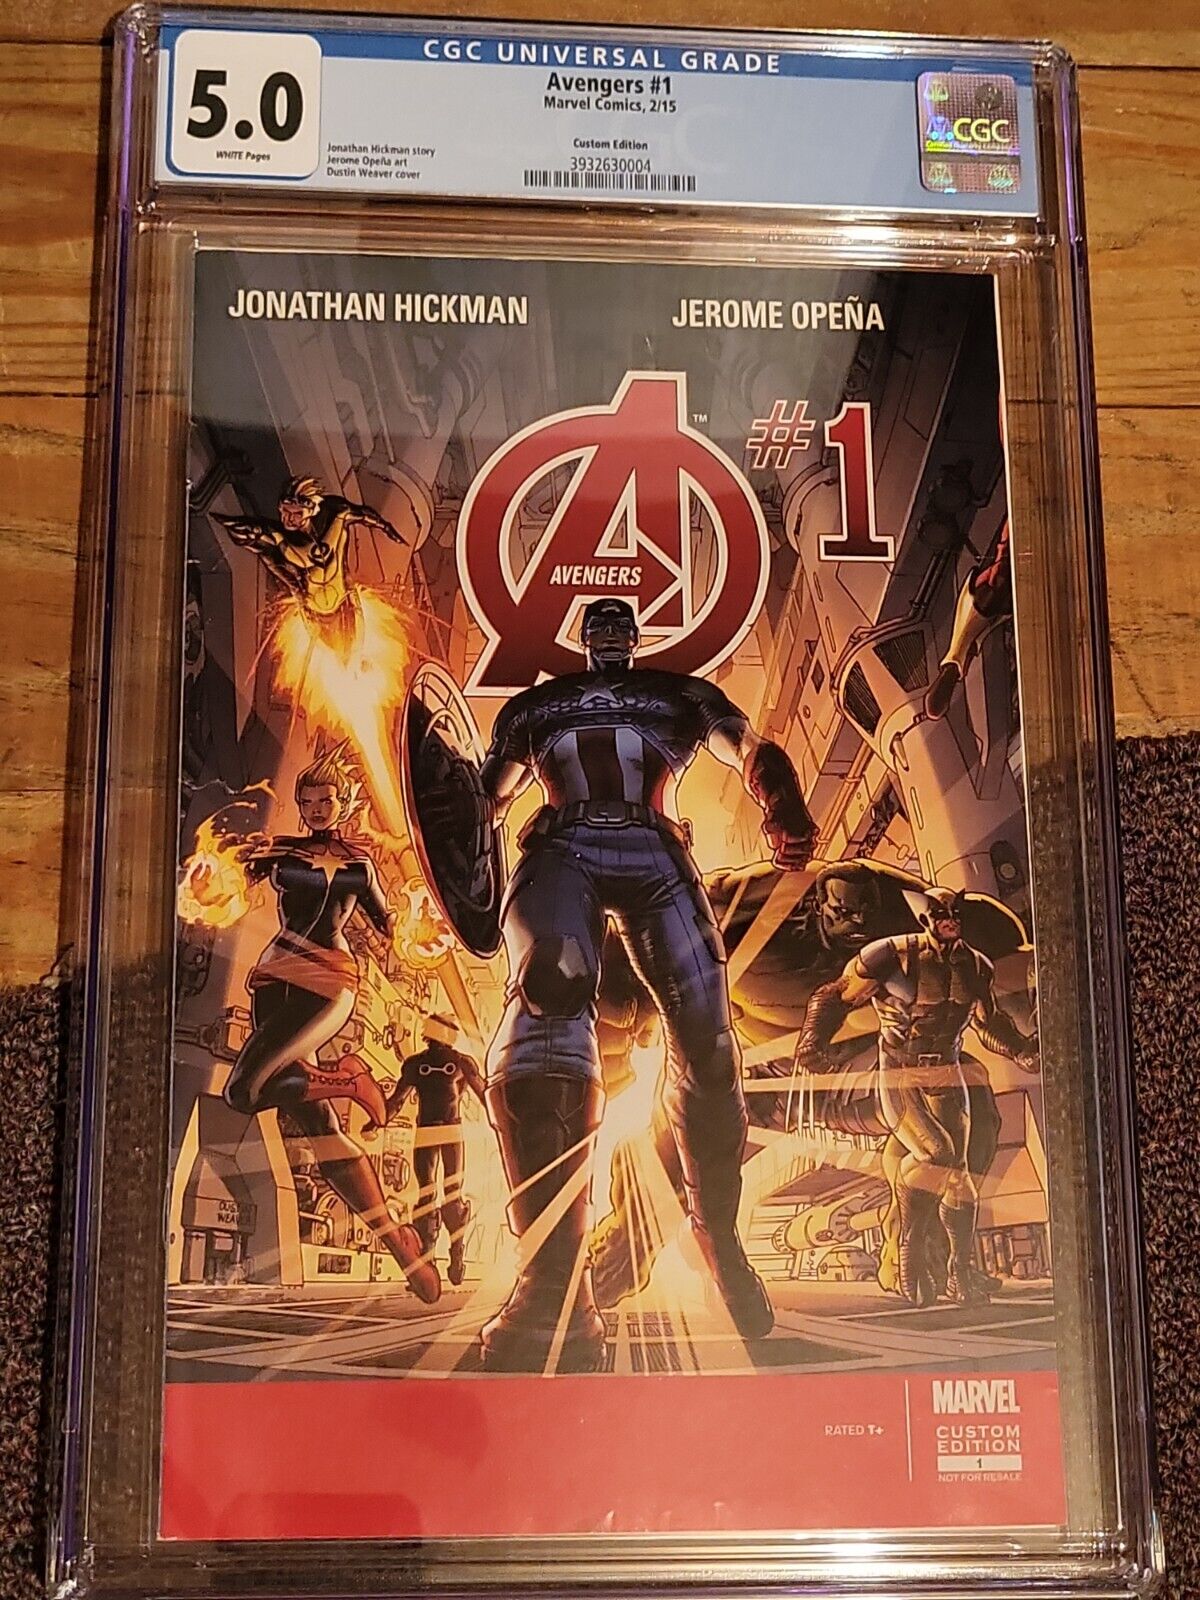 Avengers 1 Custom Edition CGC 5.0 Only One in census wolverine hulk captain amer